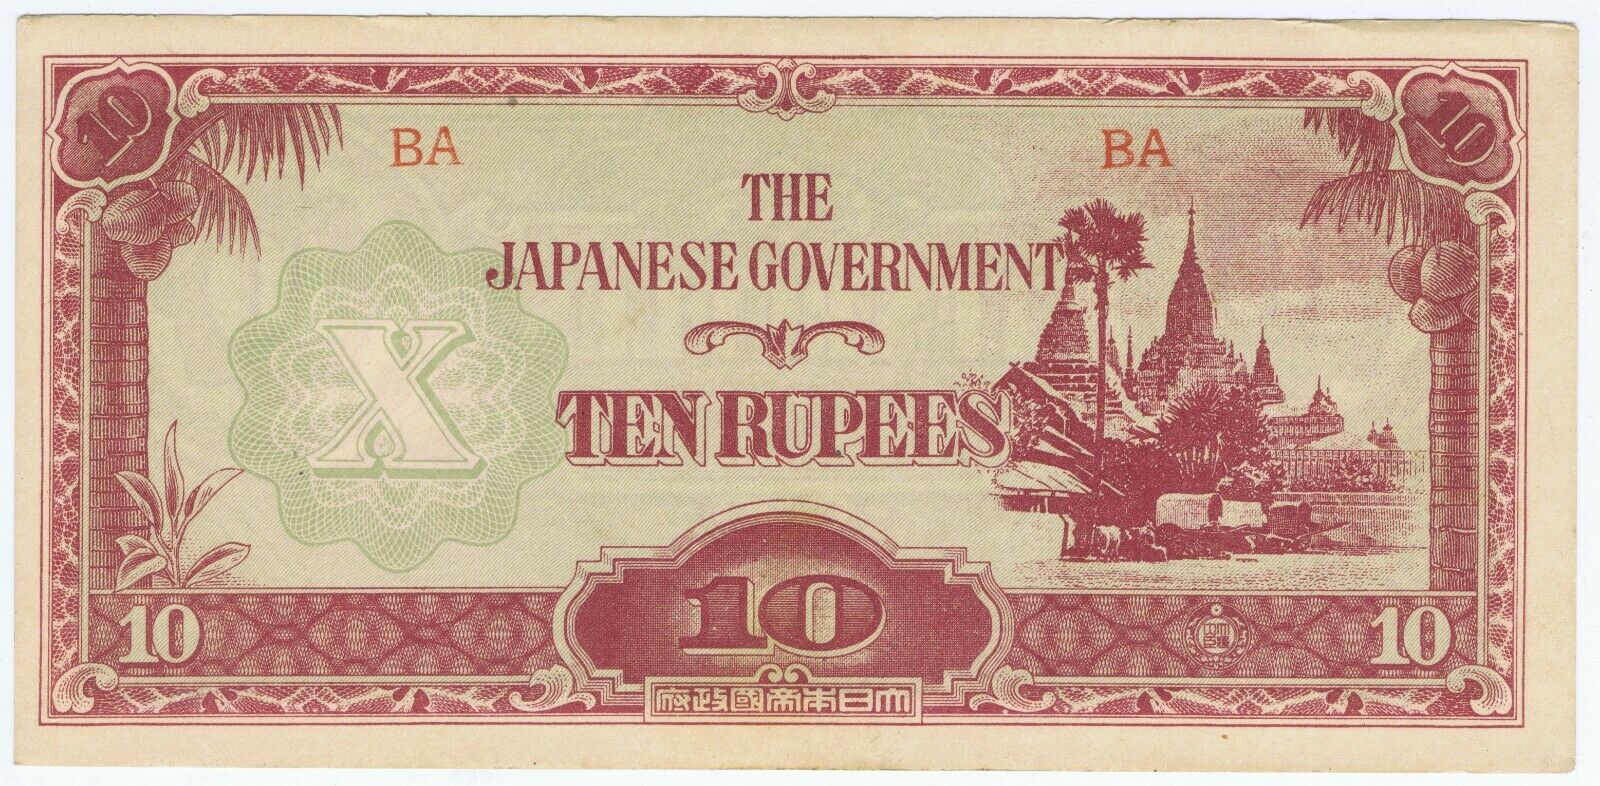 BURMA JAPAN INVASION 10 RUPEES WATERMARK BUT NO THREADS SCHWAN BOLING # 2157a